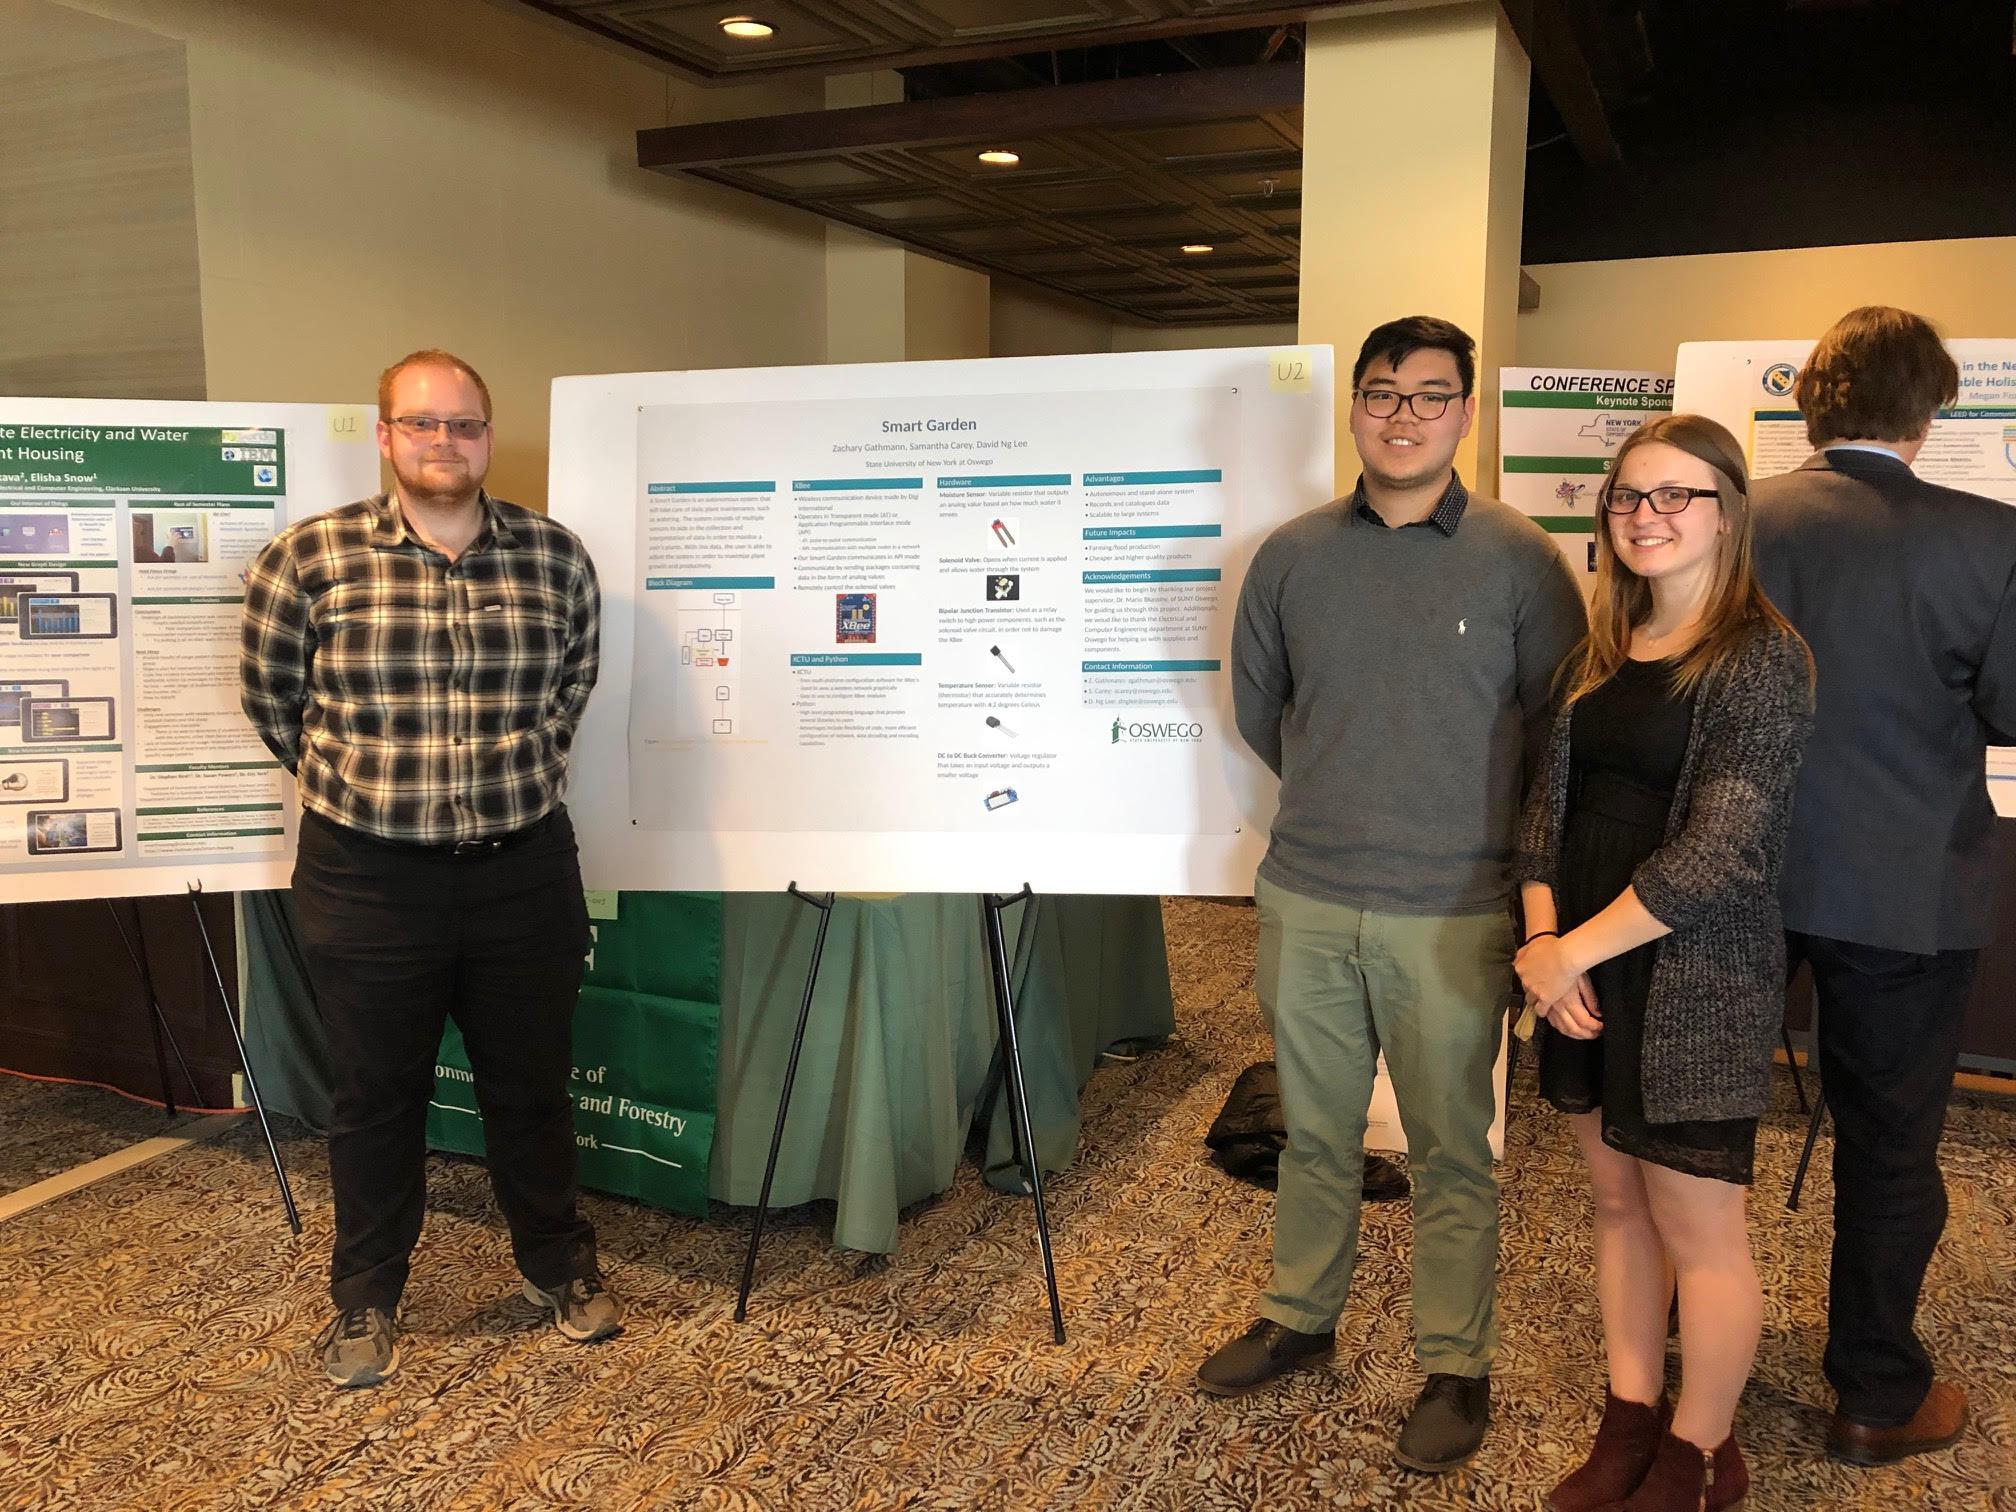 Student who created Smart Garden giving poster presentation